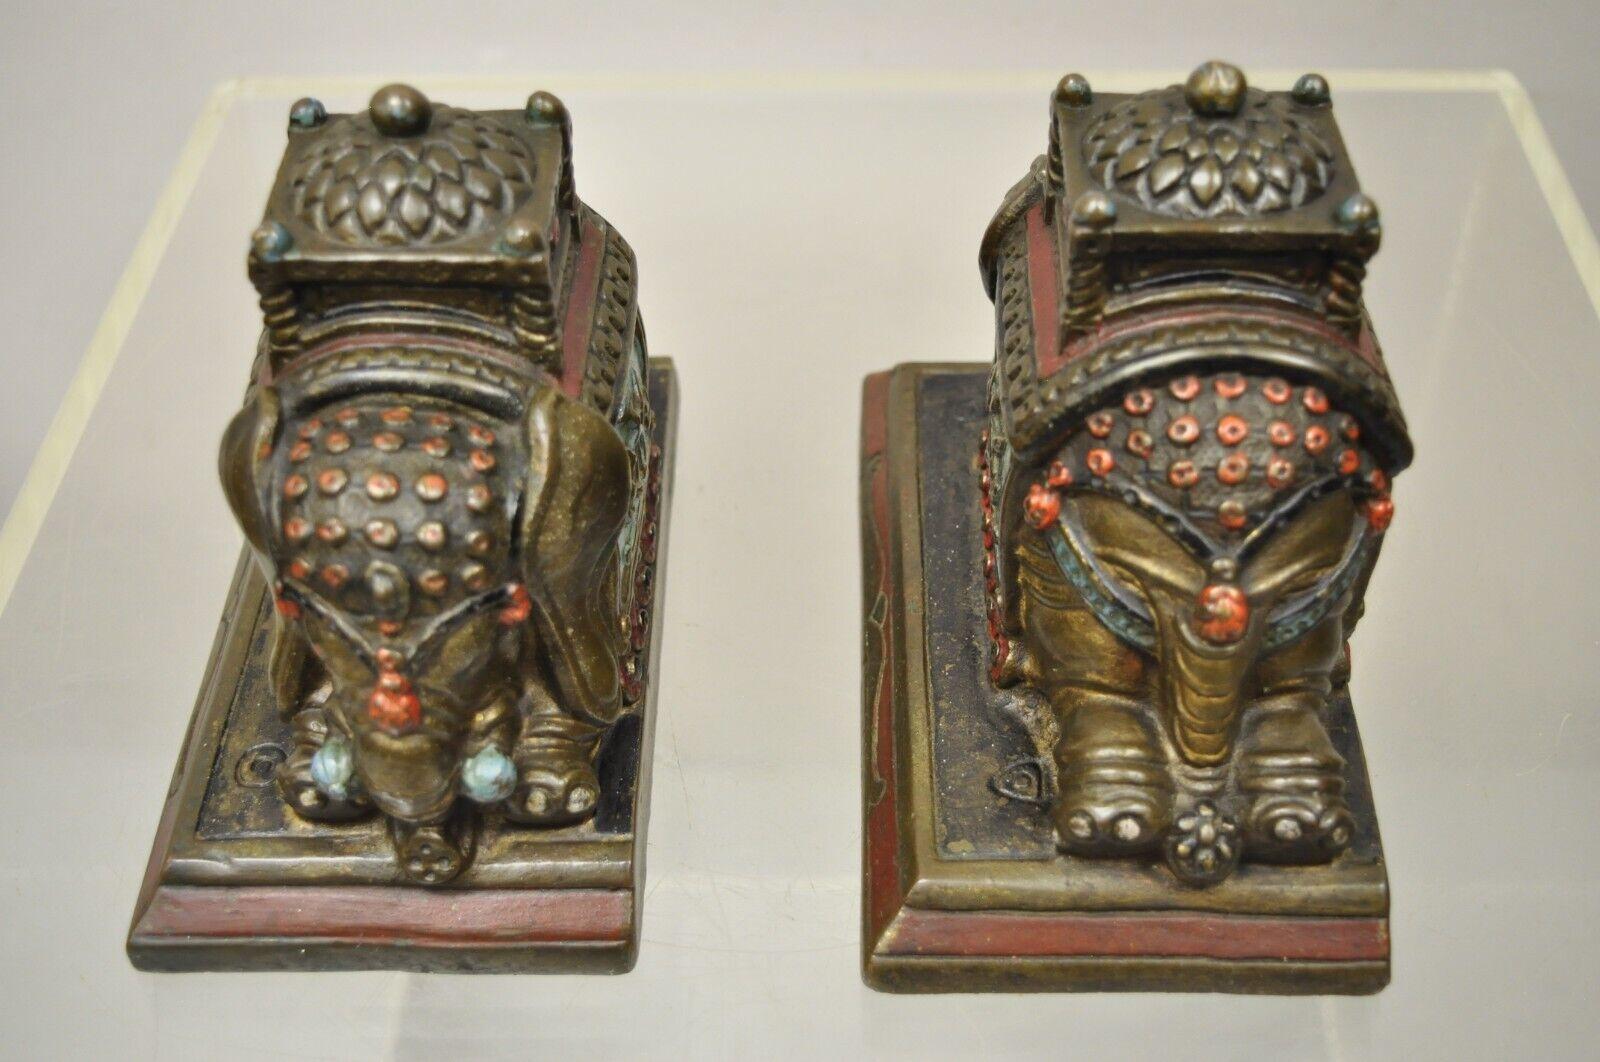 20th Century Antique Armor Bronze Indian Elephant Metal Clad Bookends, a Pair